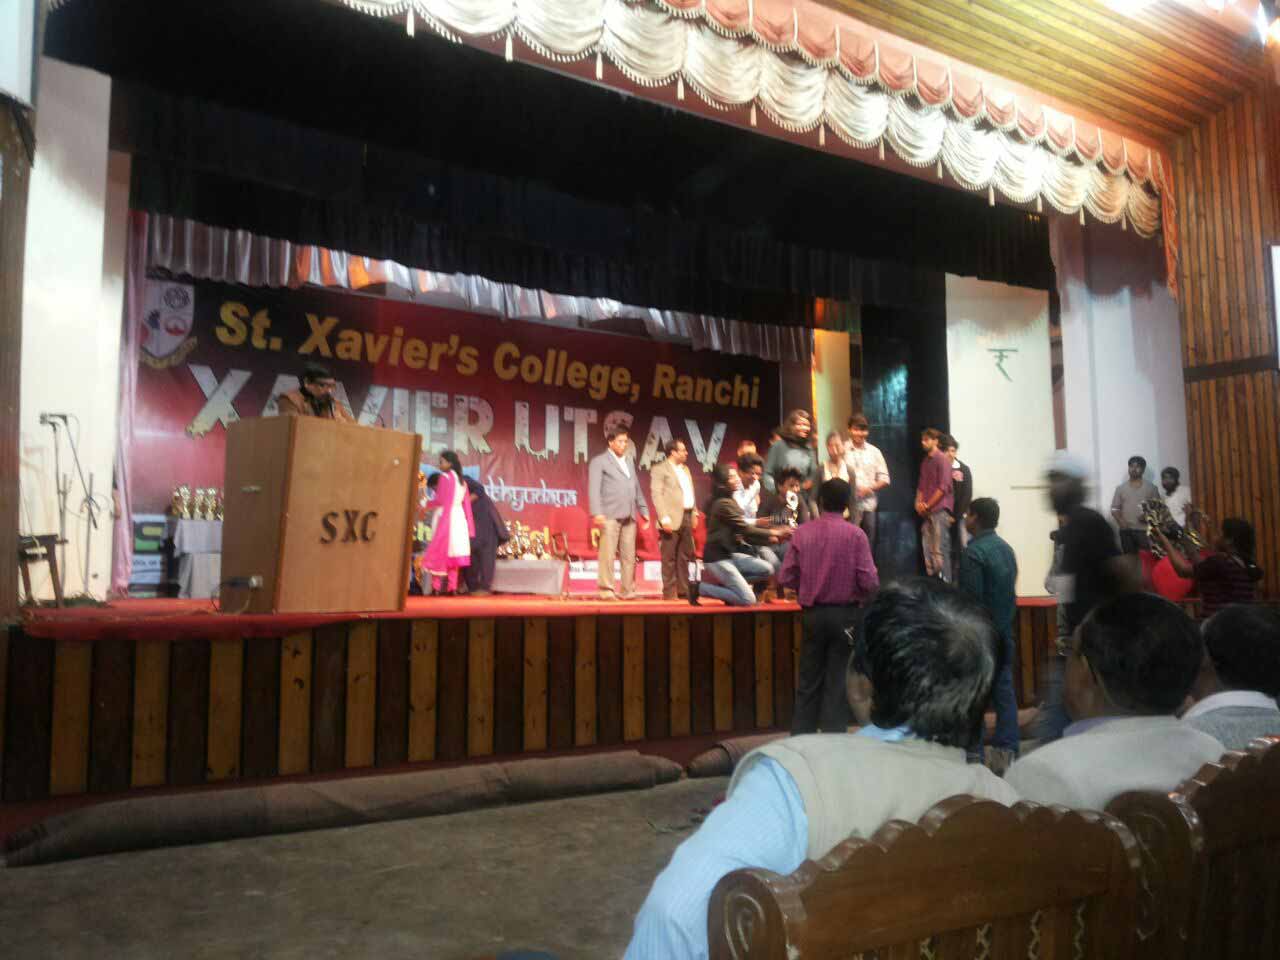 YPF Talk, Extempore & Sign for Peace at St Xavier’s College, Ranchi